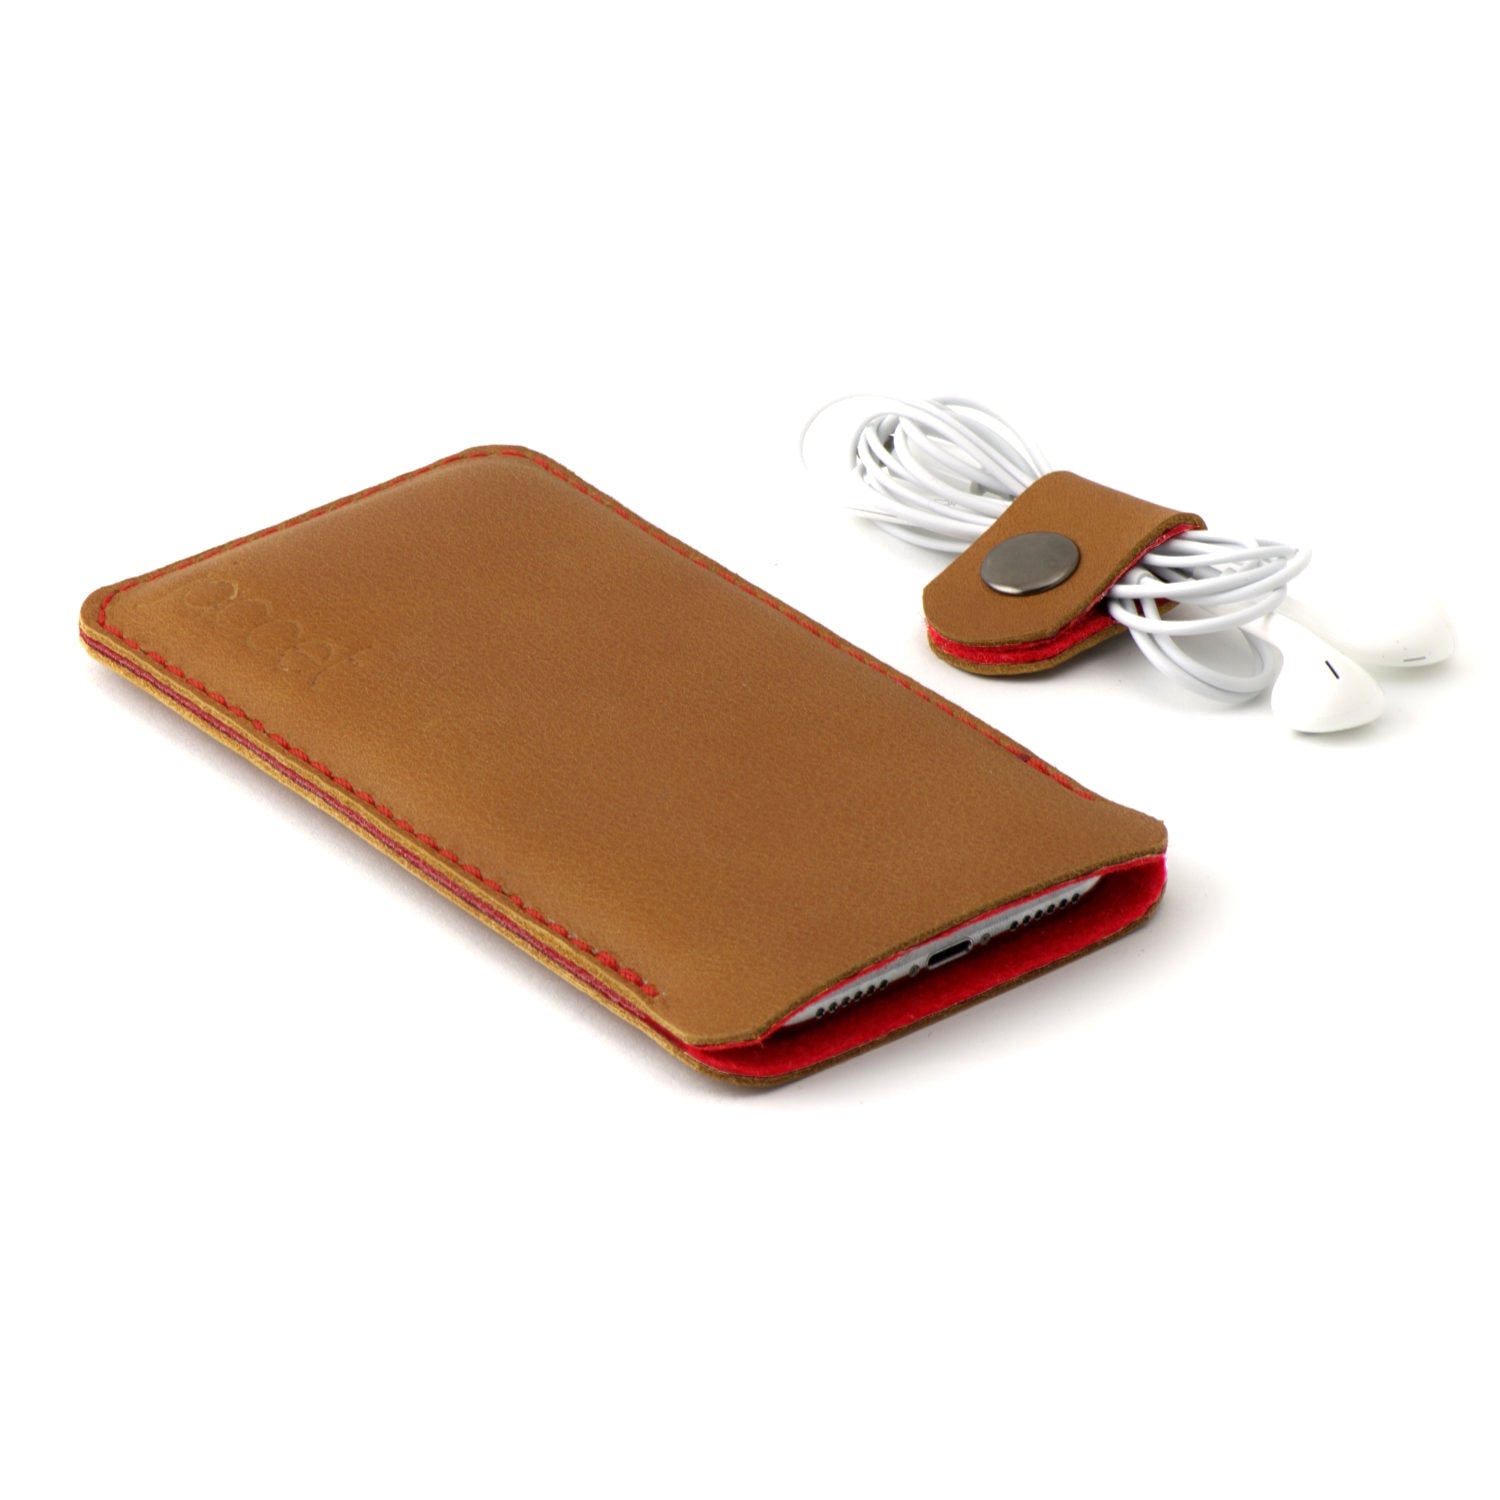 JACCET leather Google Pixel sleeve - Cognac color leather with red wool felt - 100% Handmade